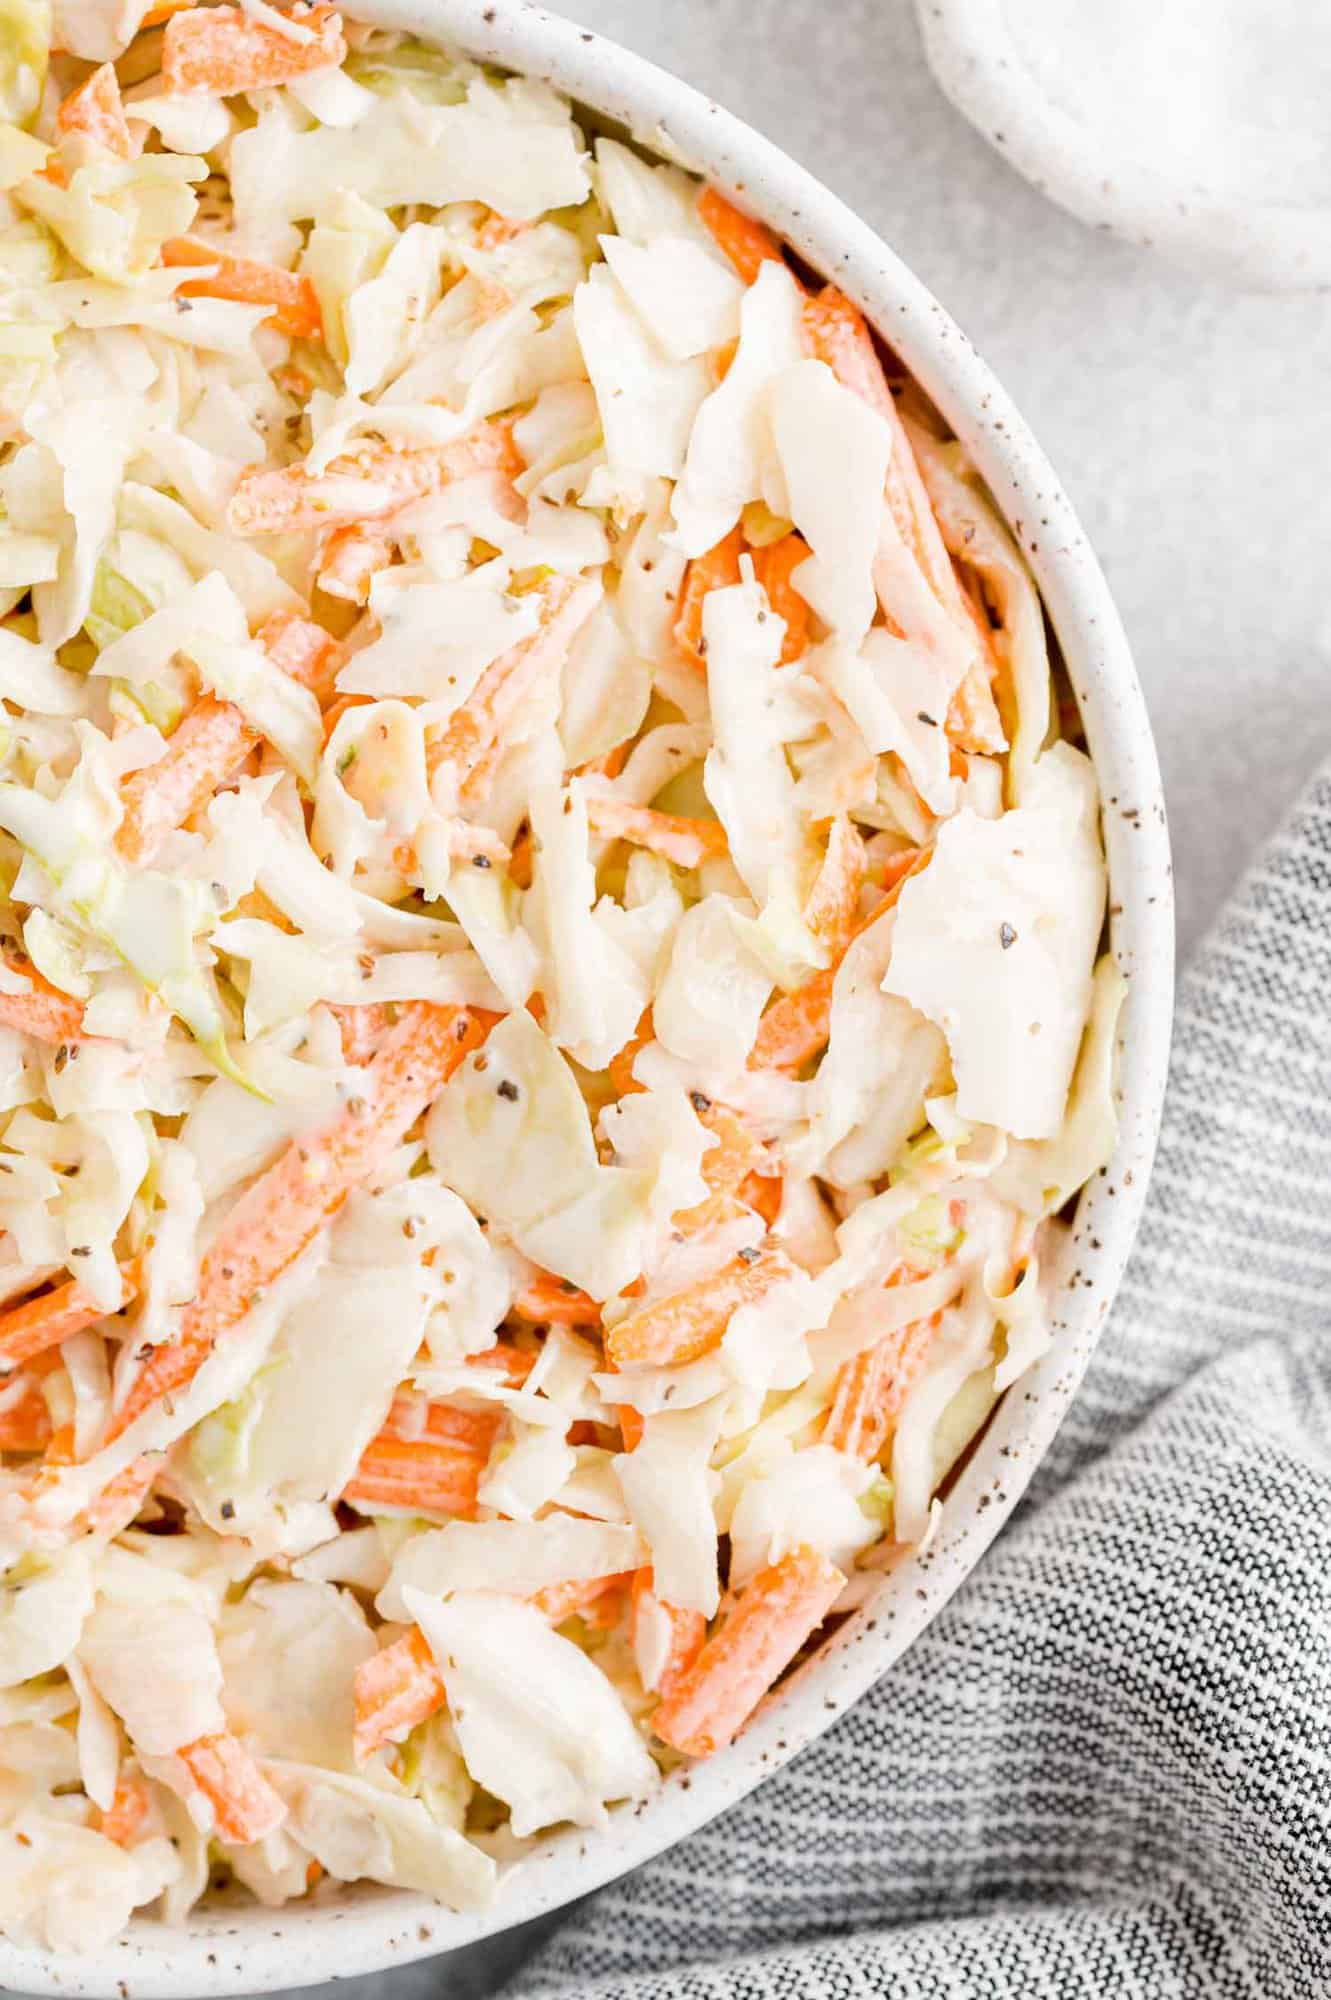 Coleslaw in a large bowl.